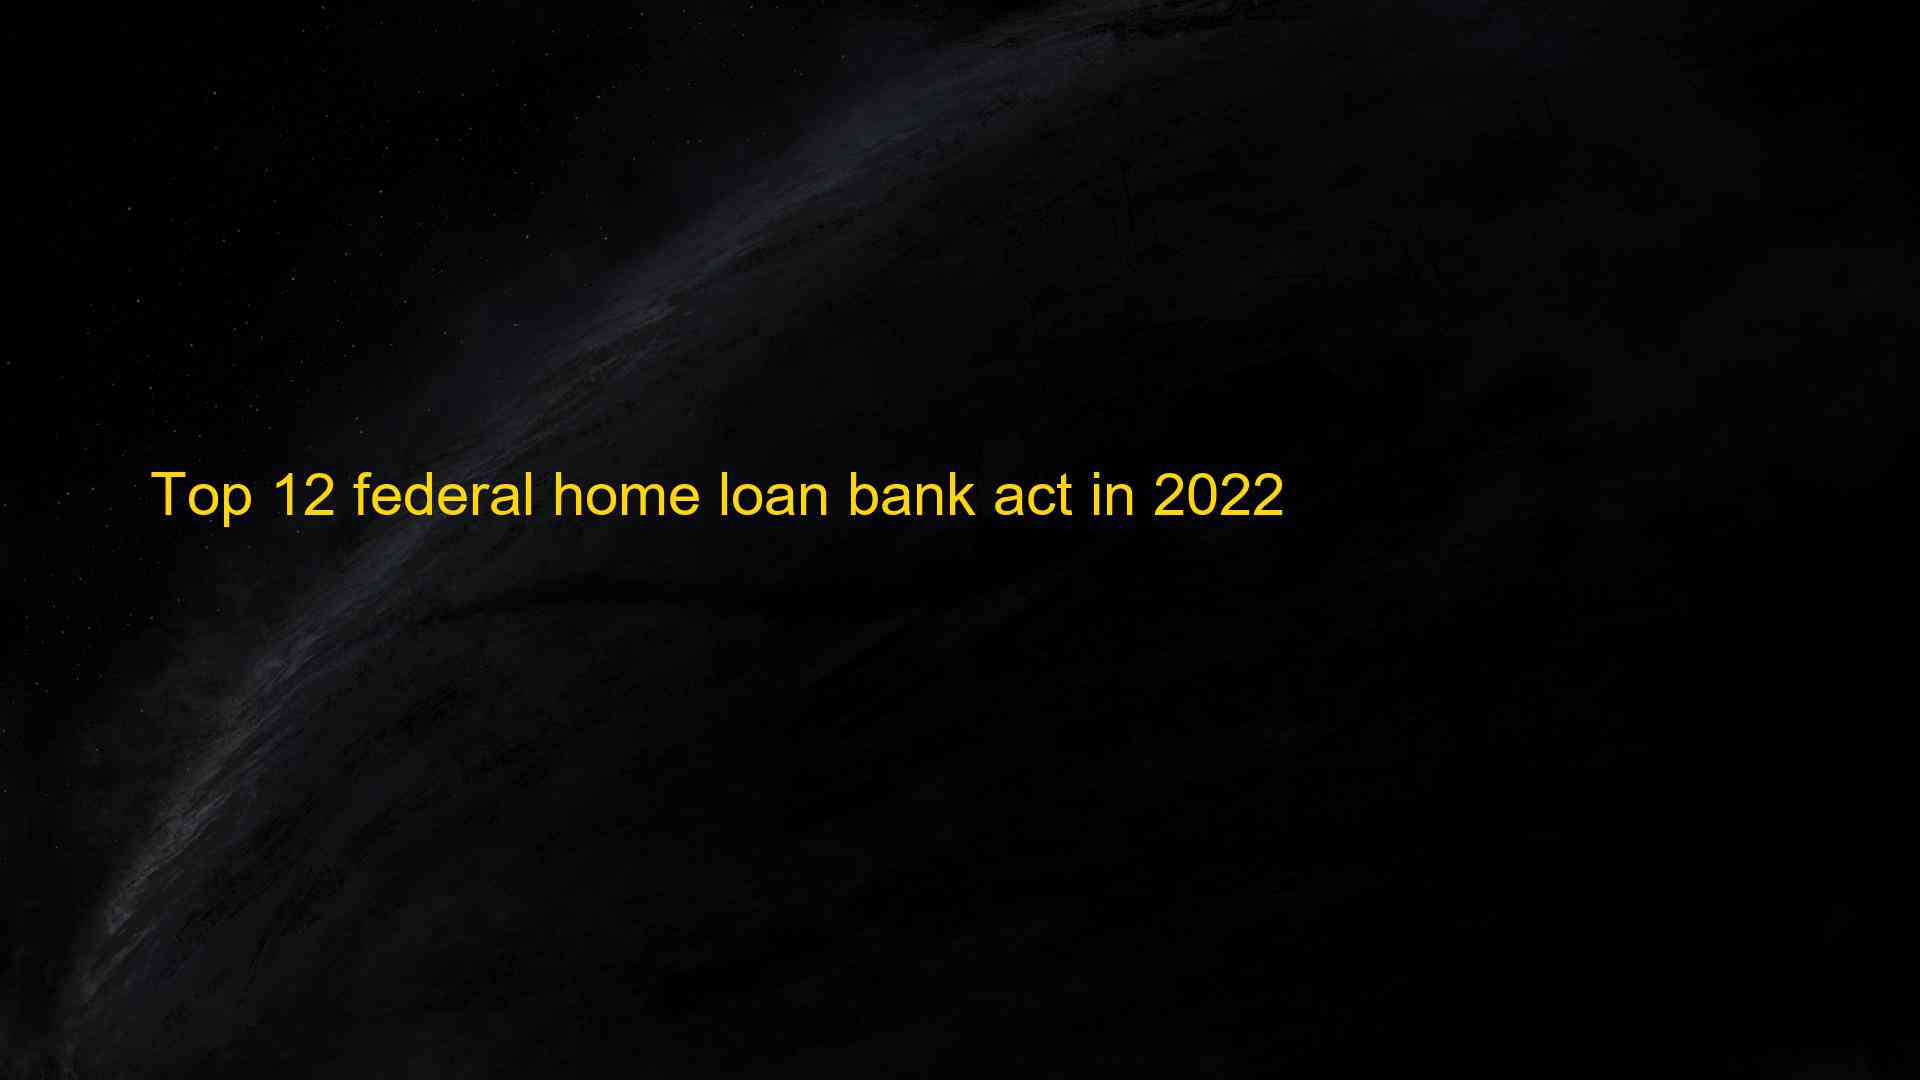 Top 12 federal home loan bank act in 2022 1659598743